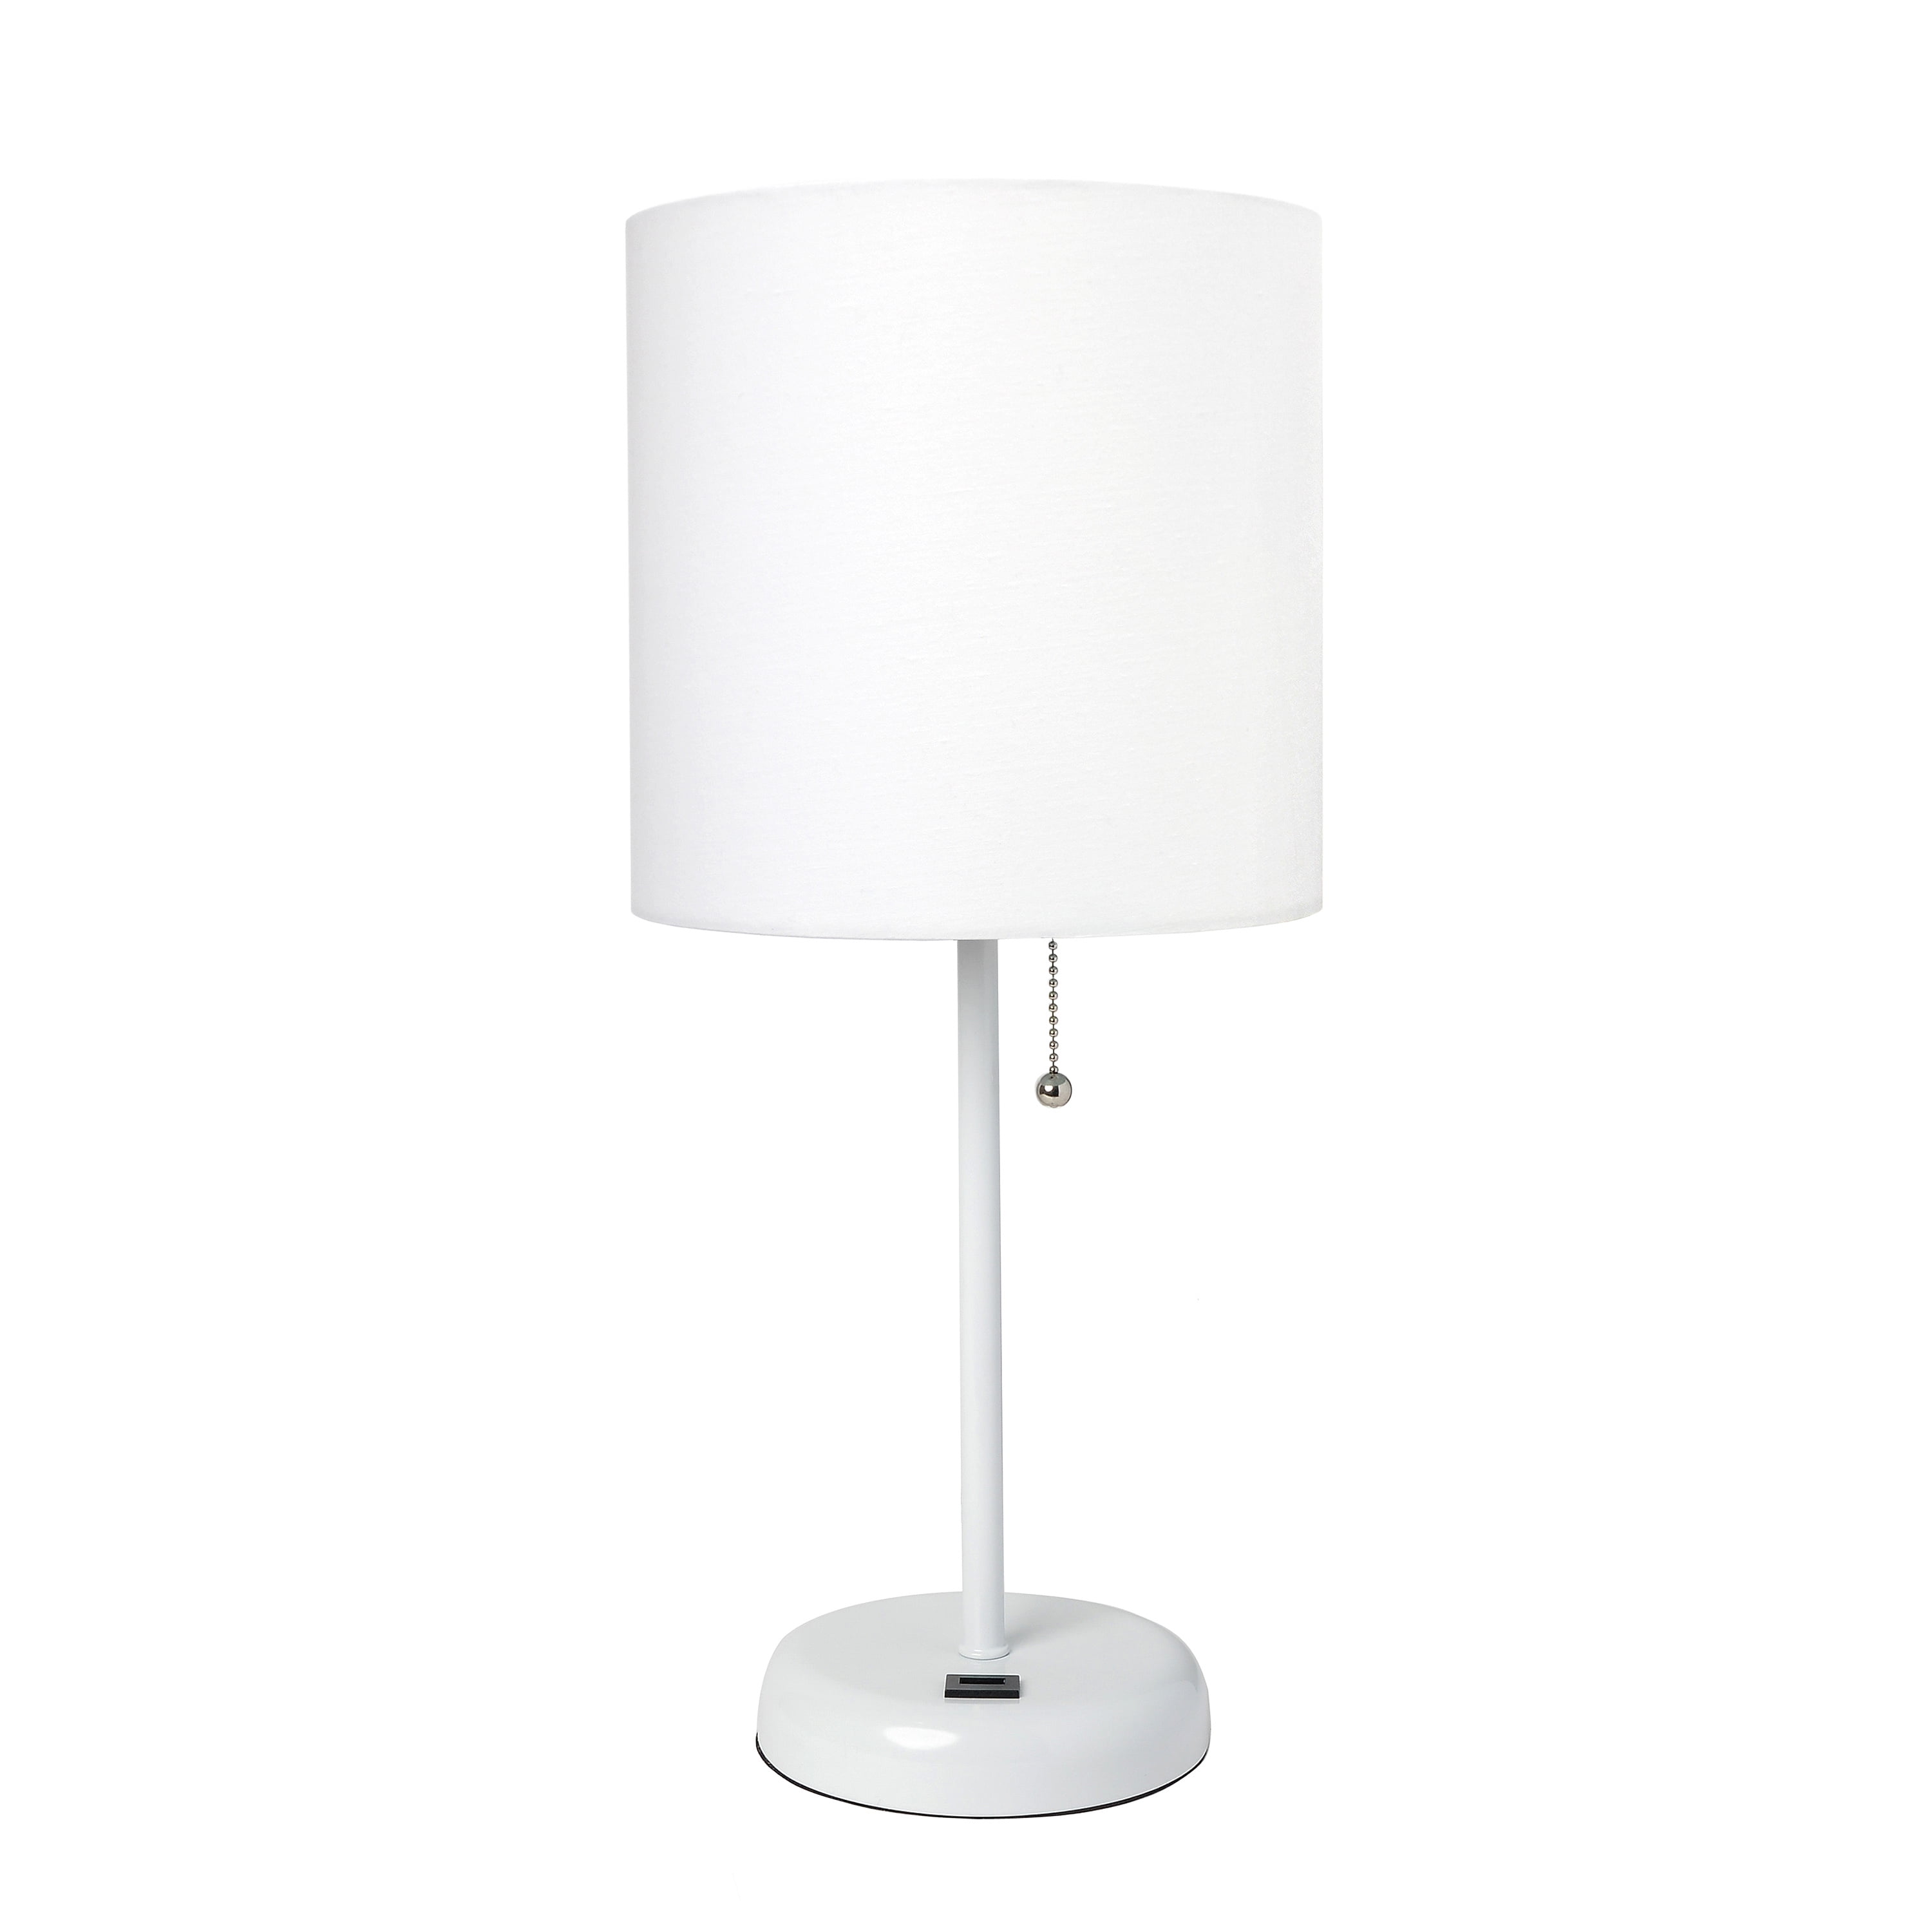 Lt2044-wow White Stick Table Lamp With Usb Charging Port & Fabric Shade, White